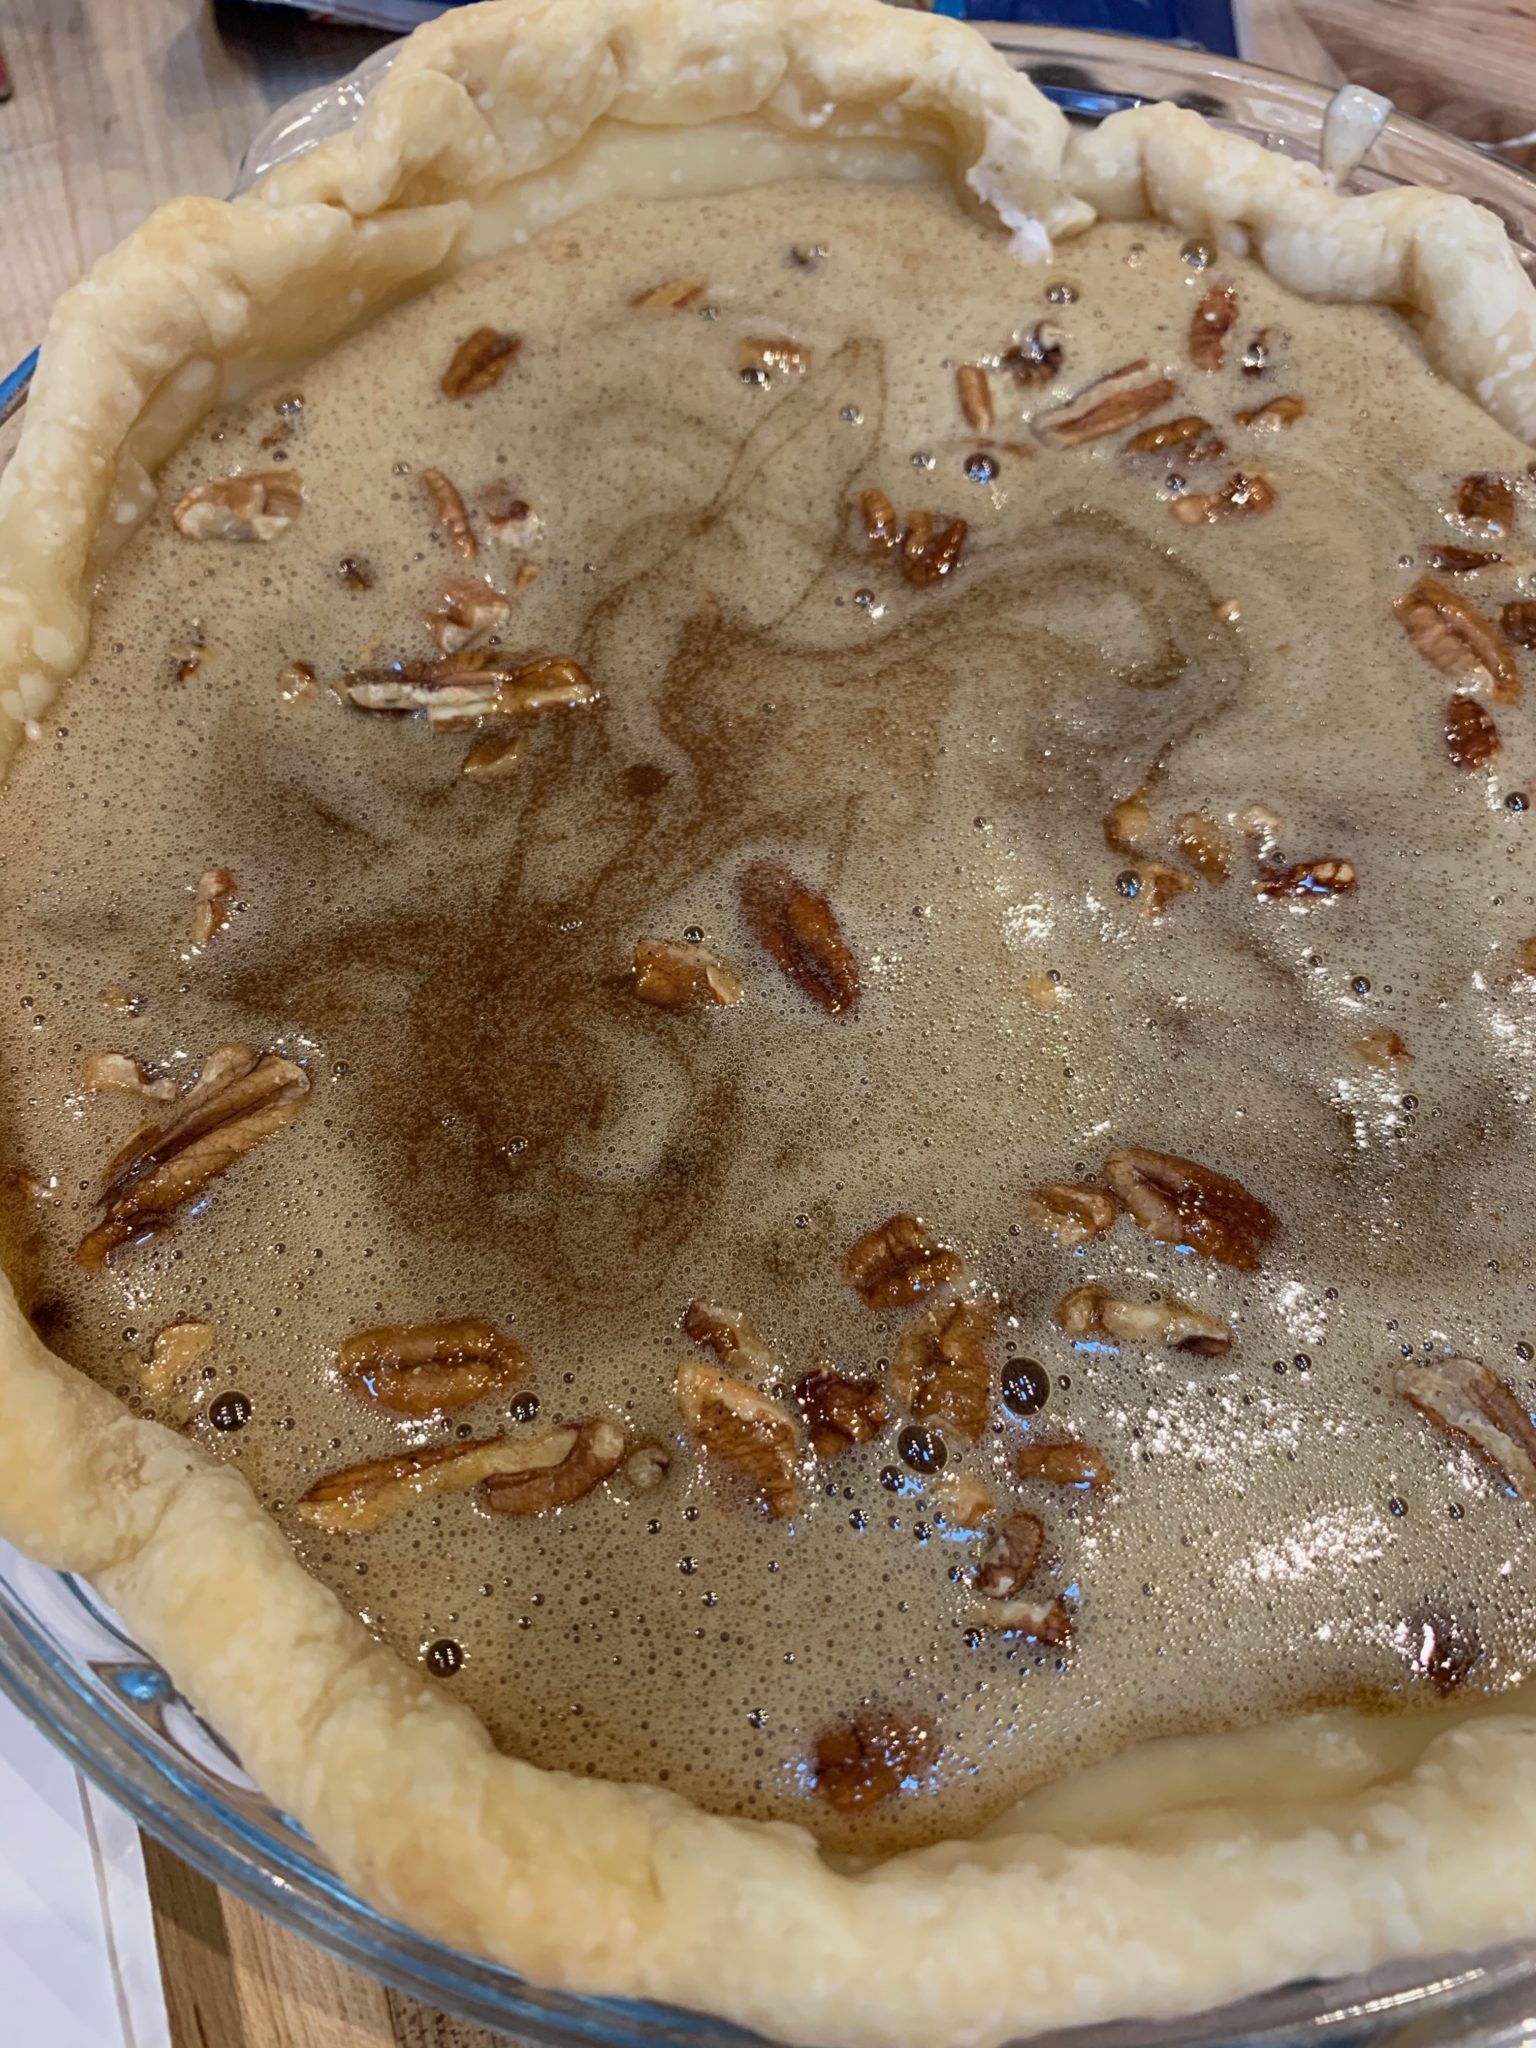 showing the pecan pie filling on top of the chopped pecans and cheesecake filling